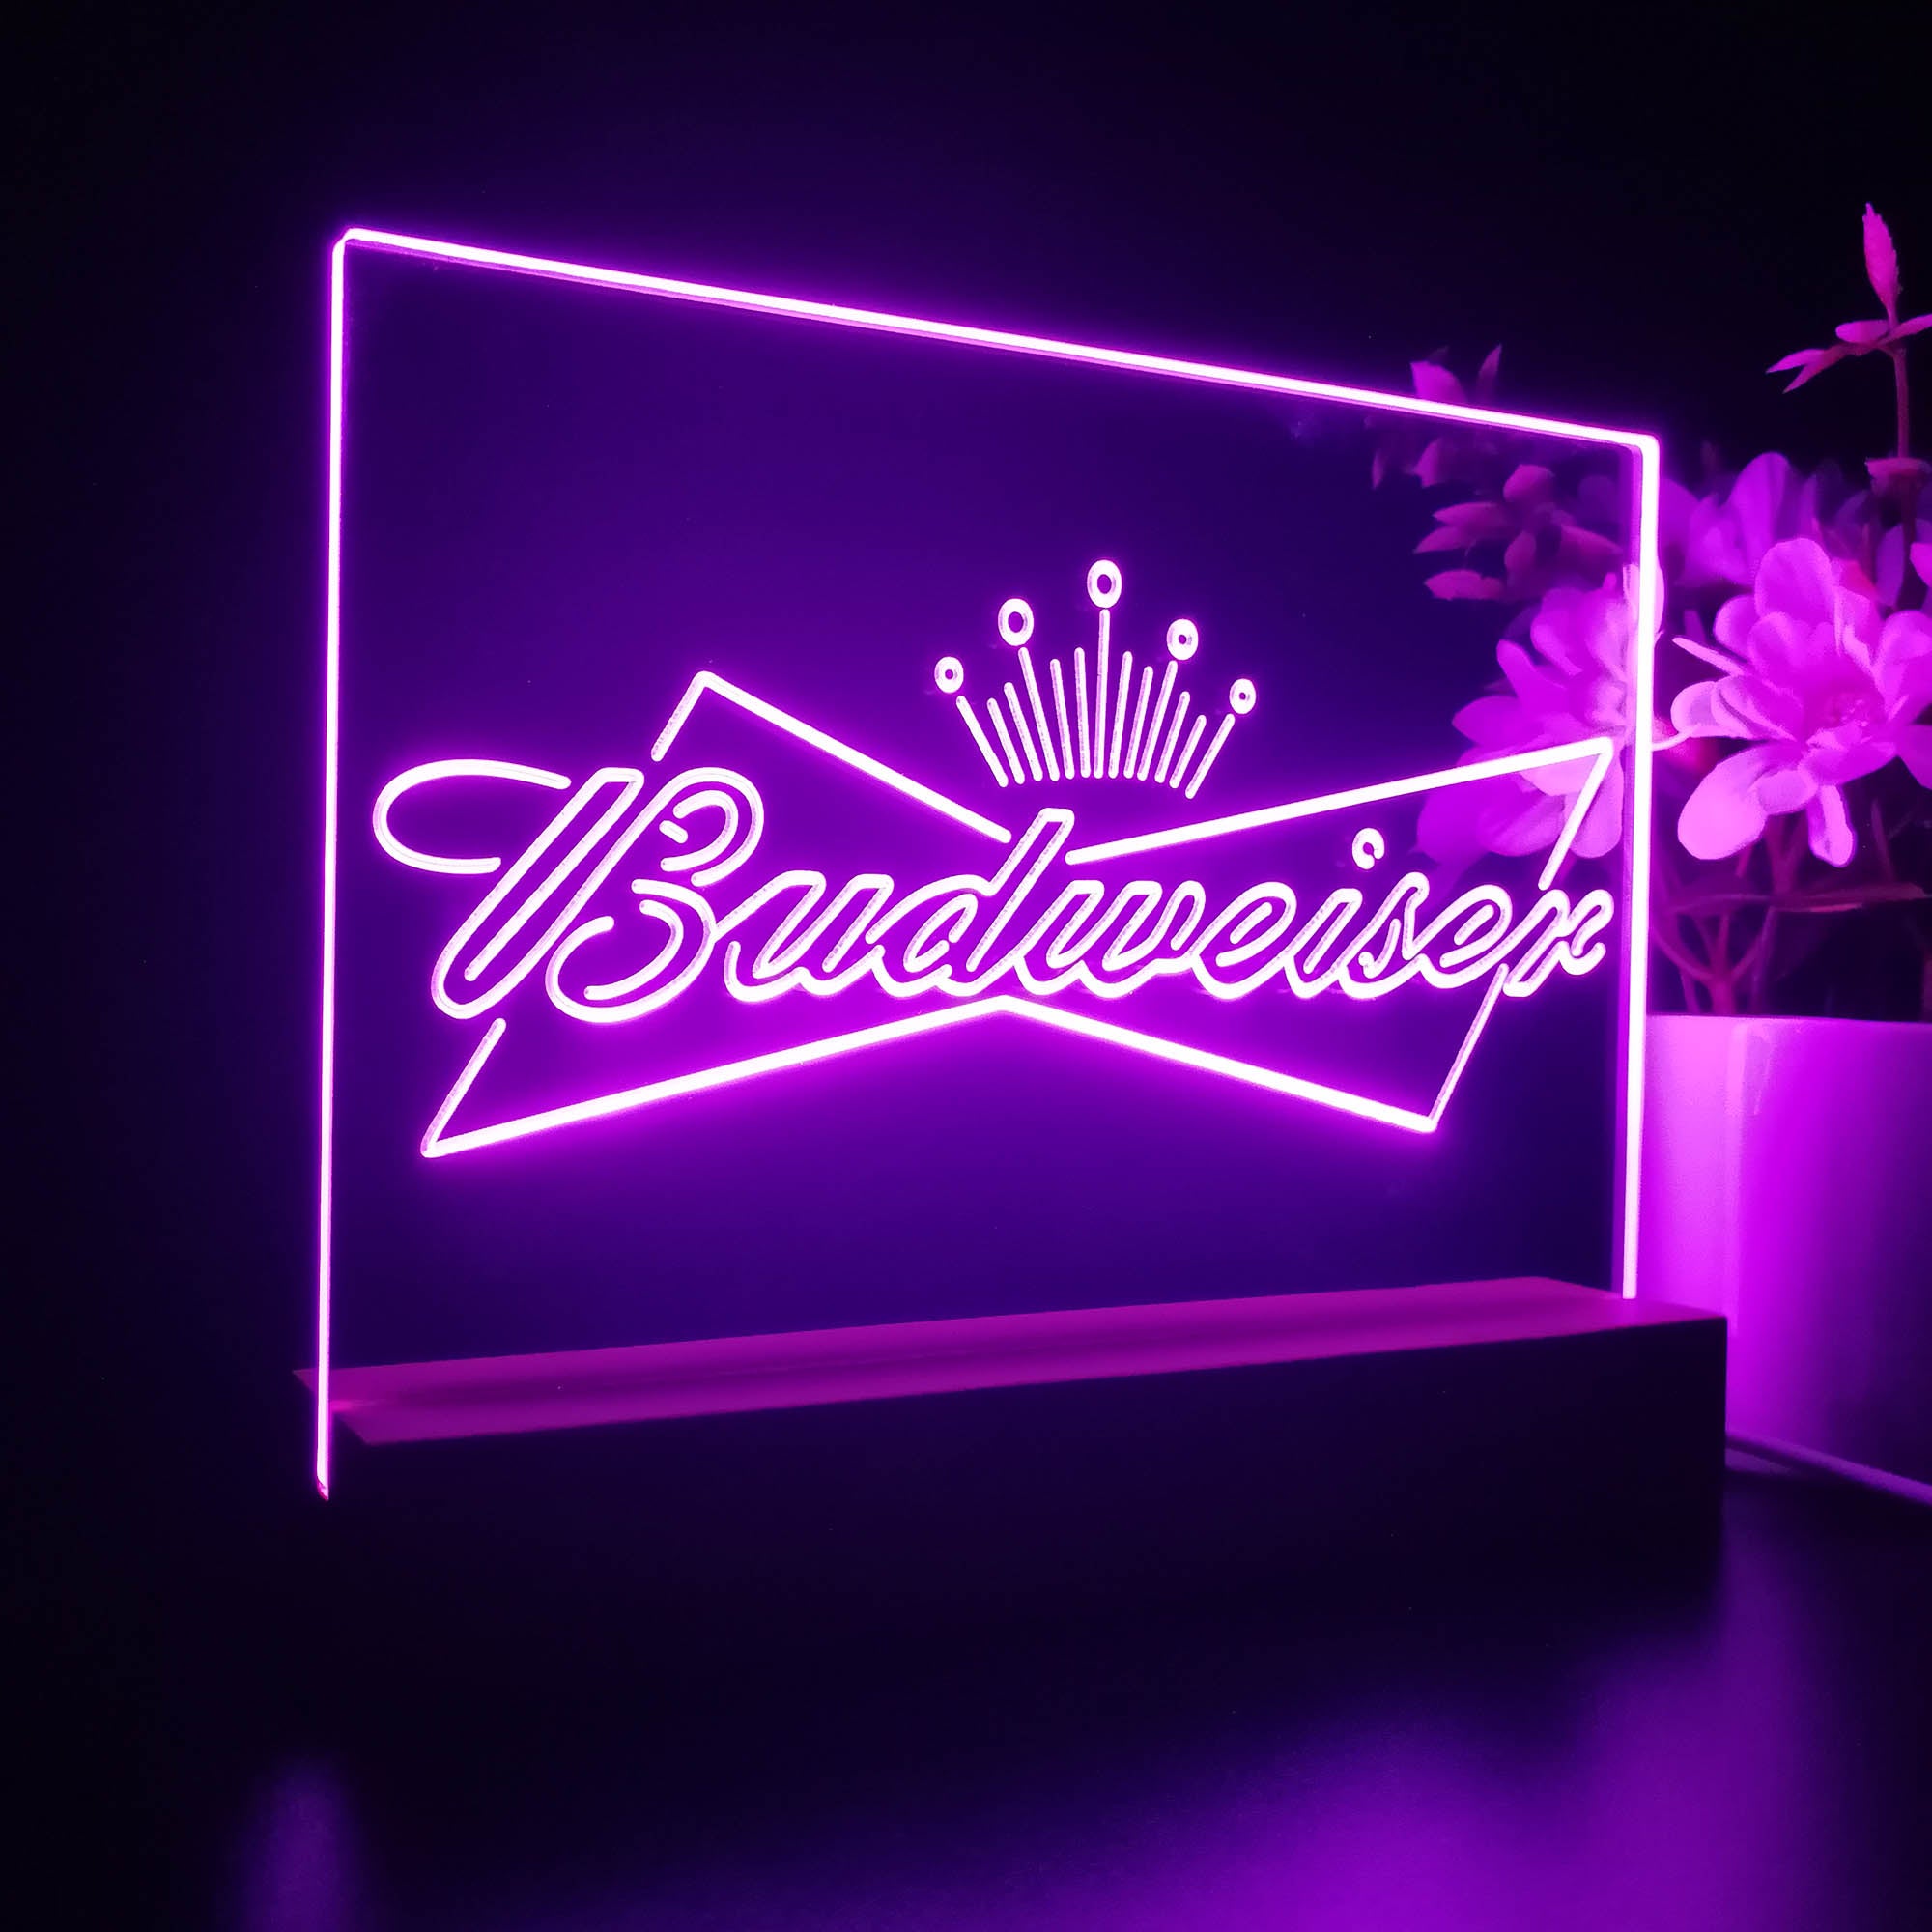 Budweisers Bowtie Crown Night Light LED Sign